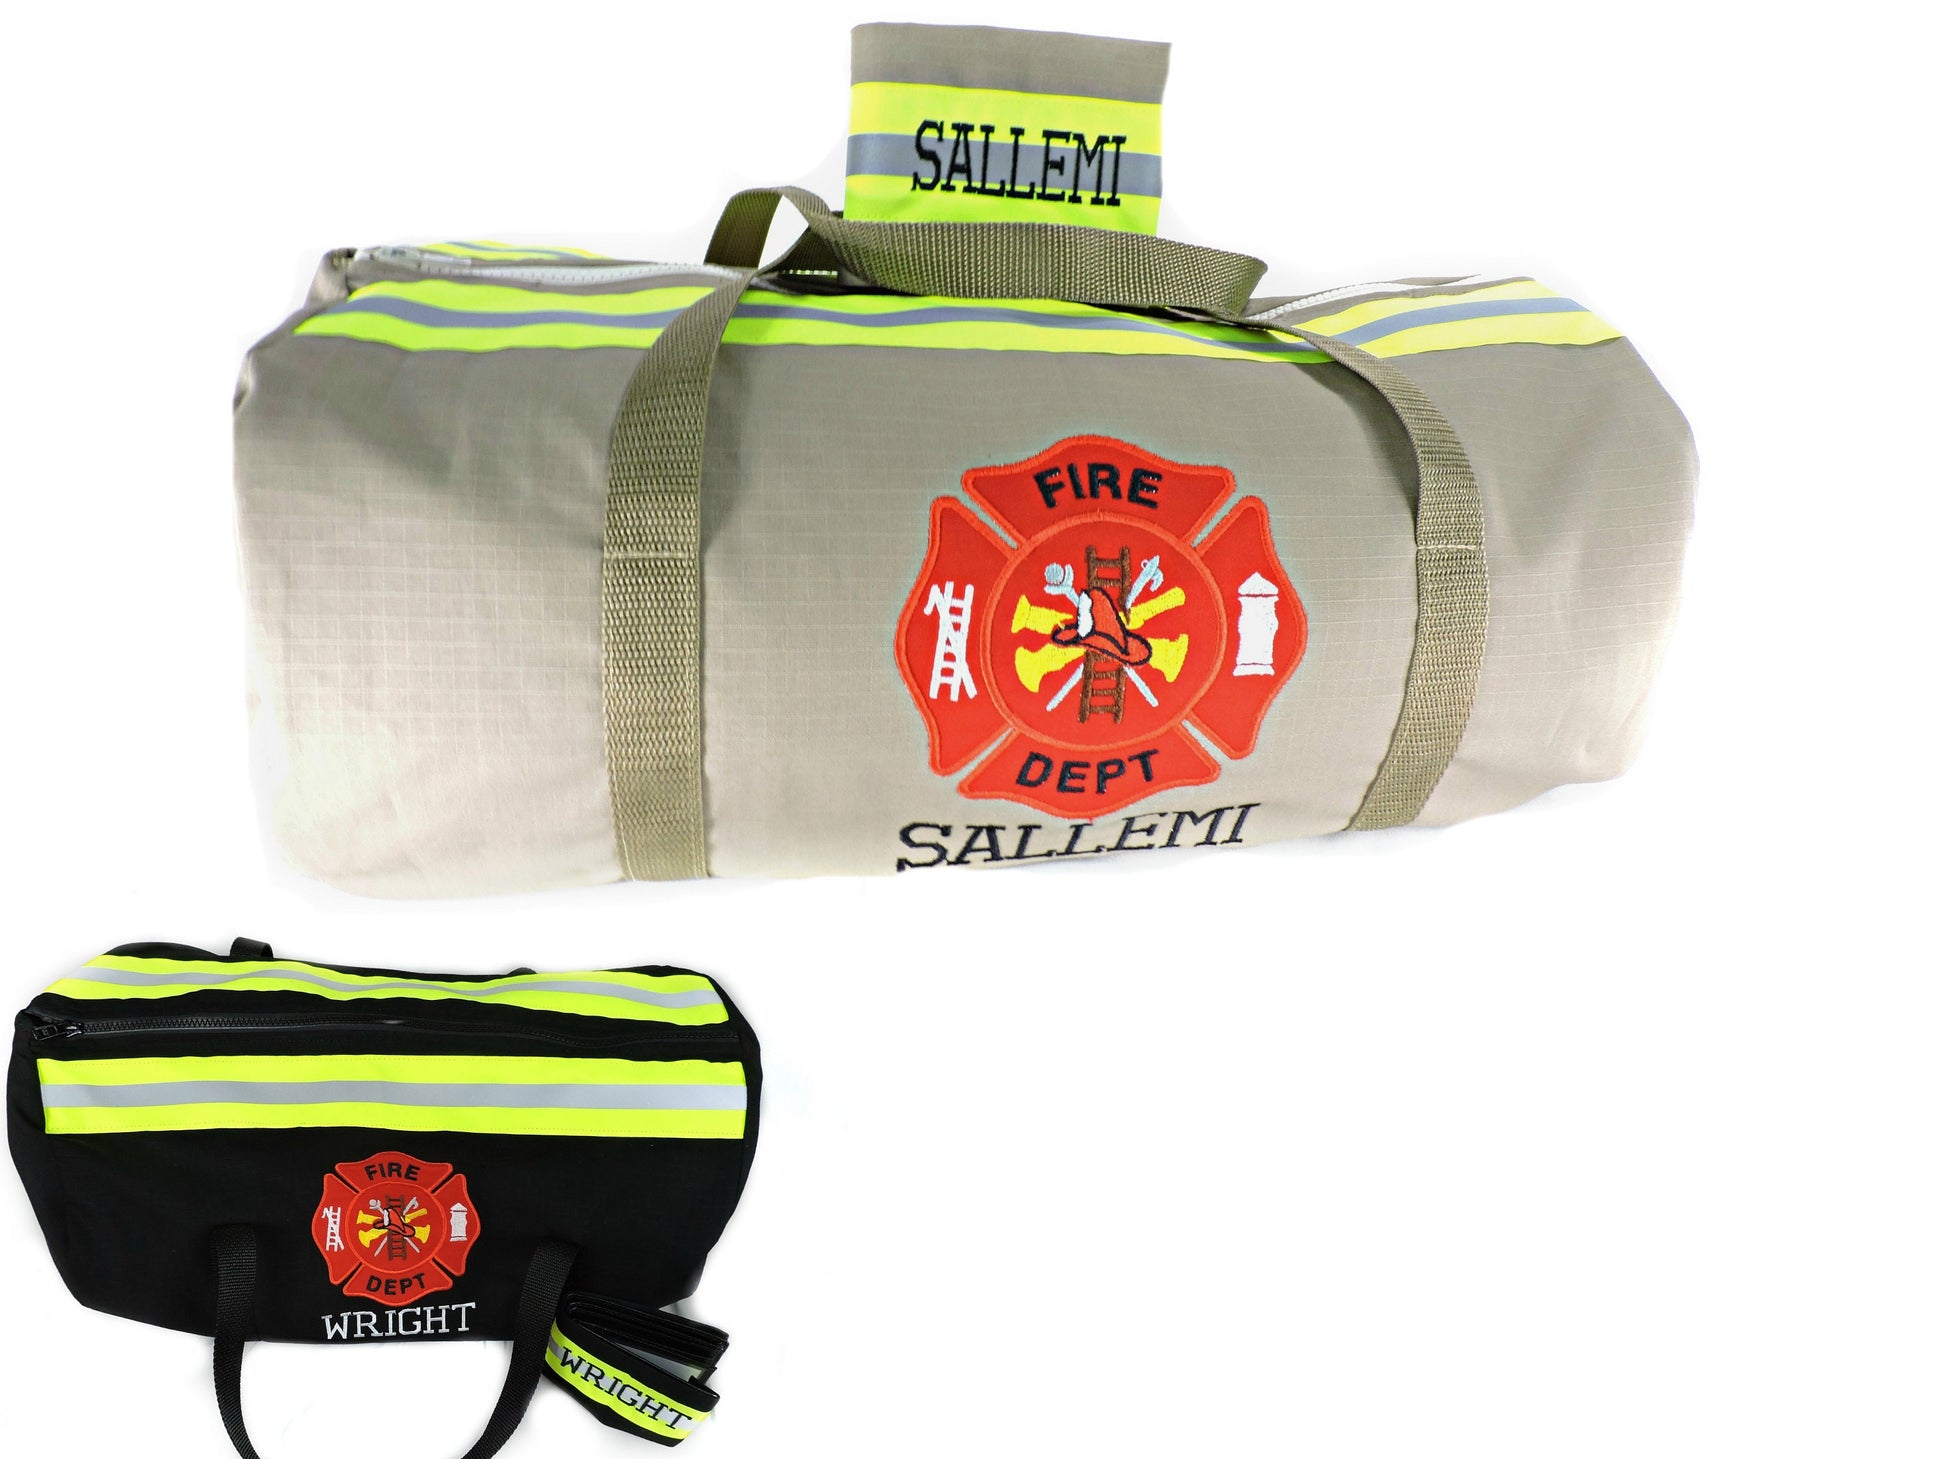 Firefighter Duffel bag and wallet